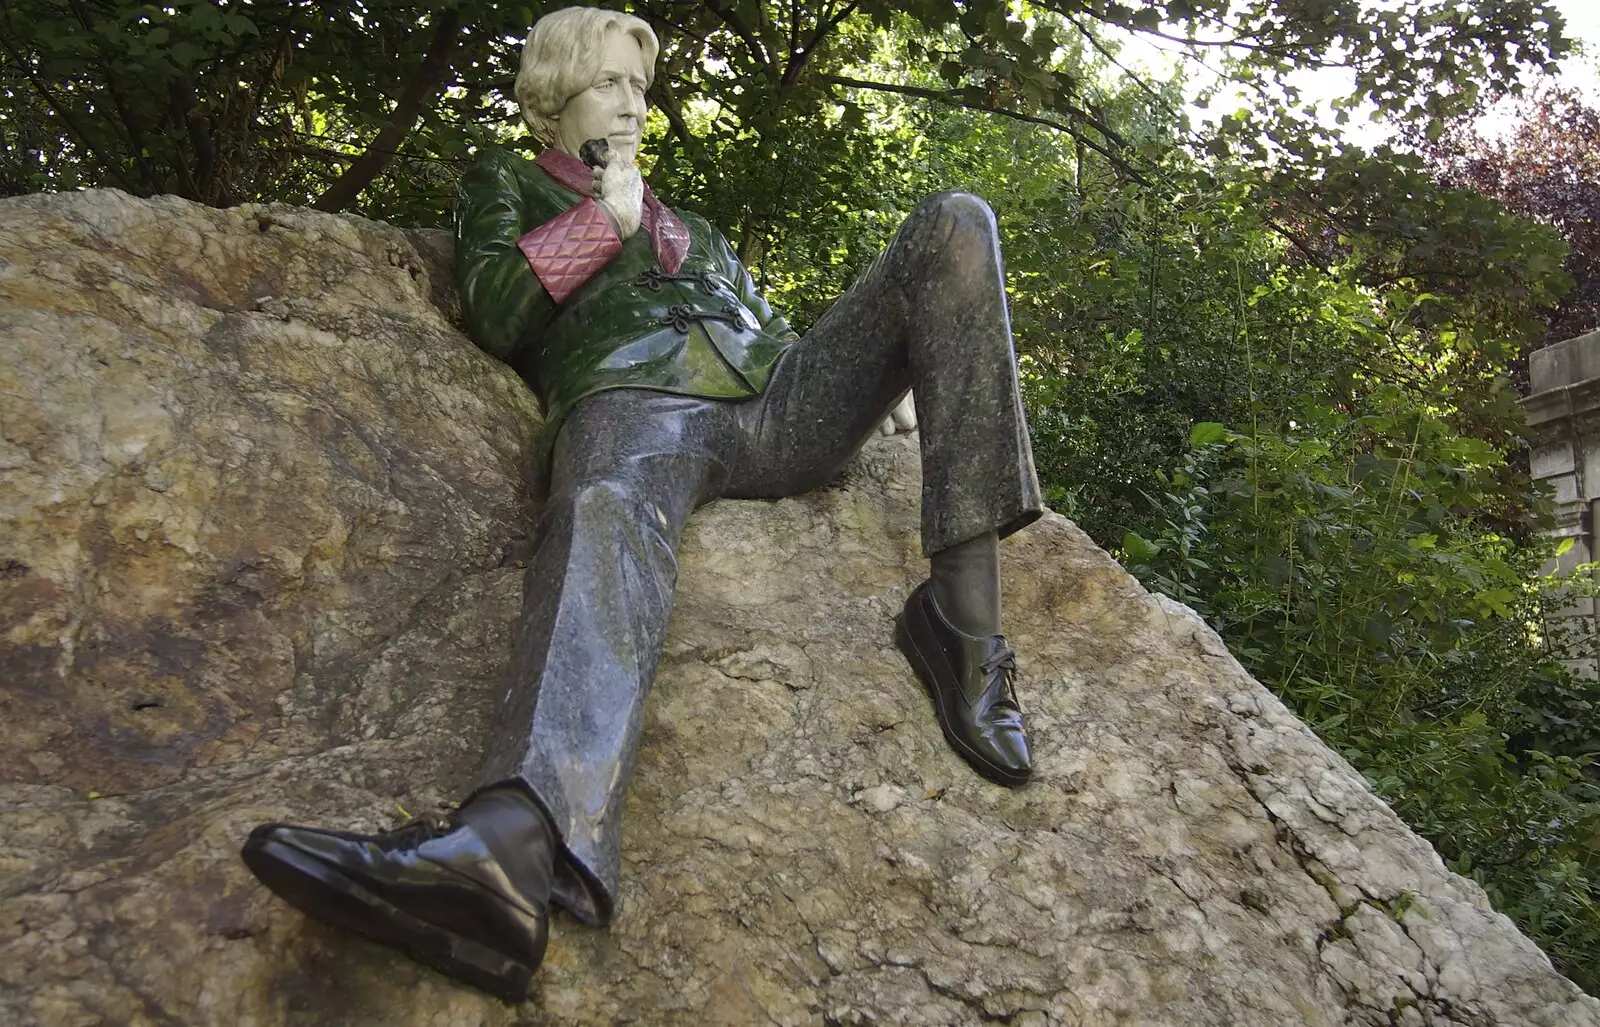 The statue of Oscar Wilde near Merrion Square , from Blackrock and Dublin, Ireland - 24th September 2007